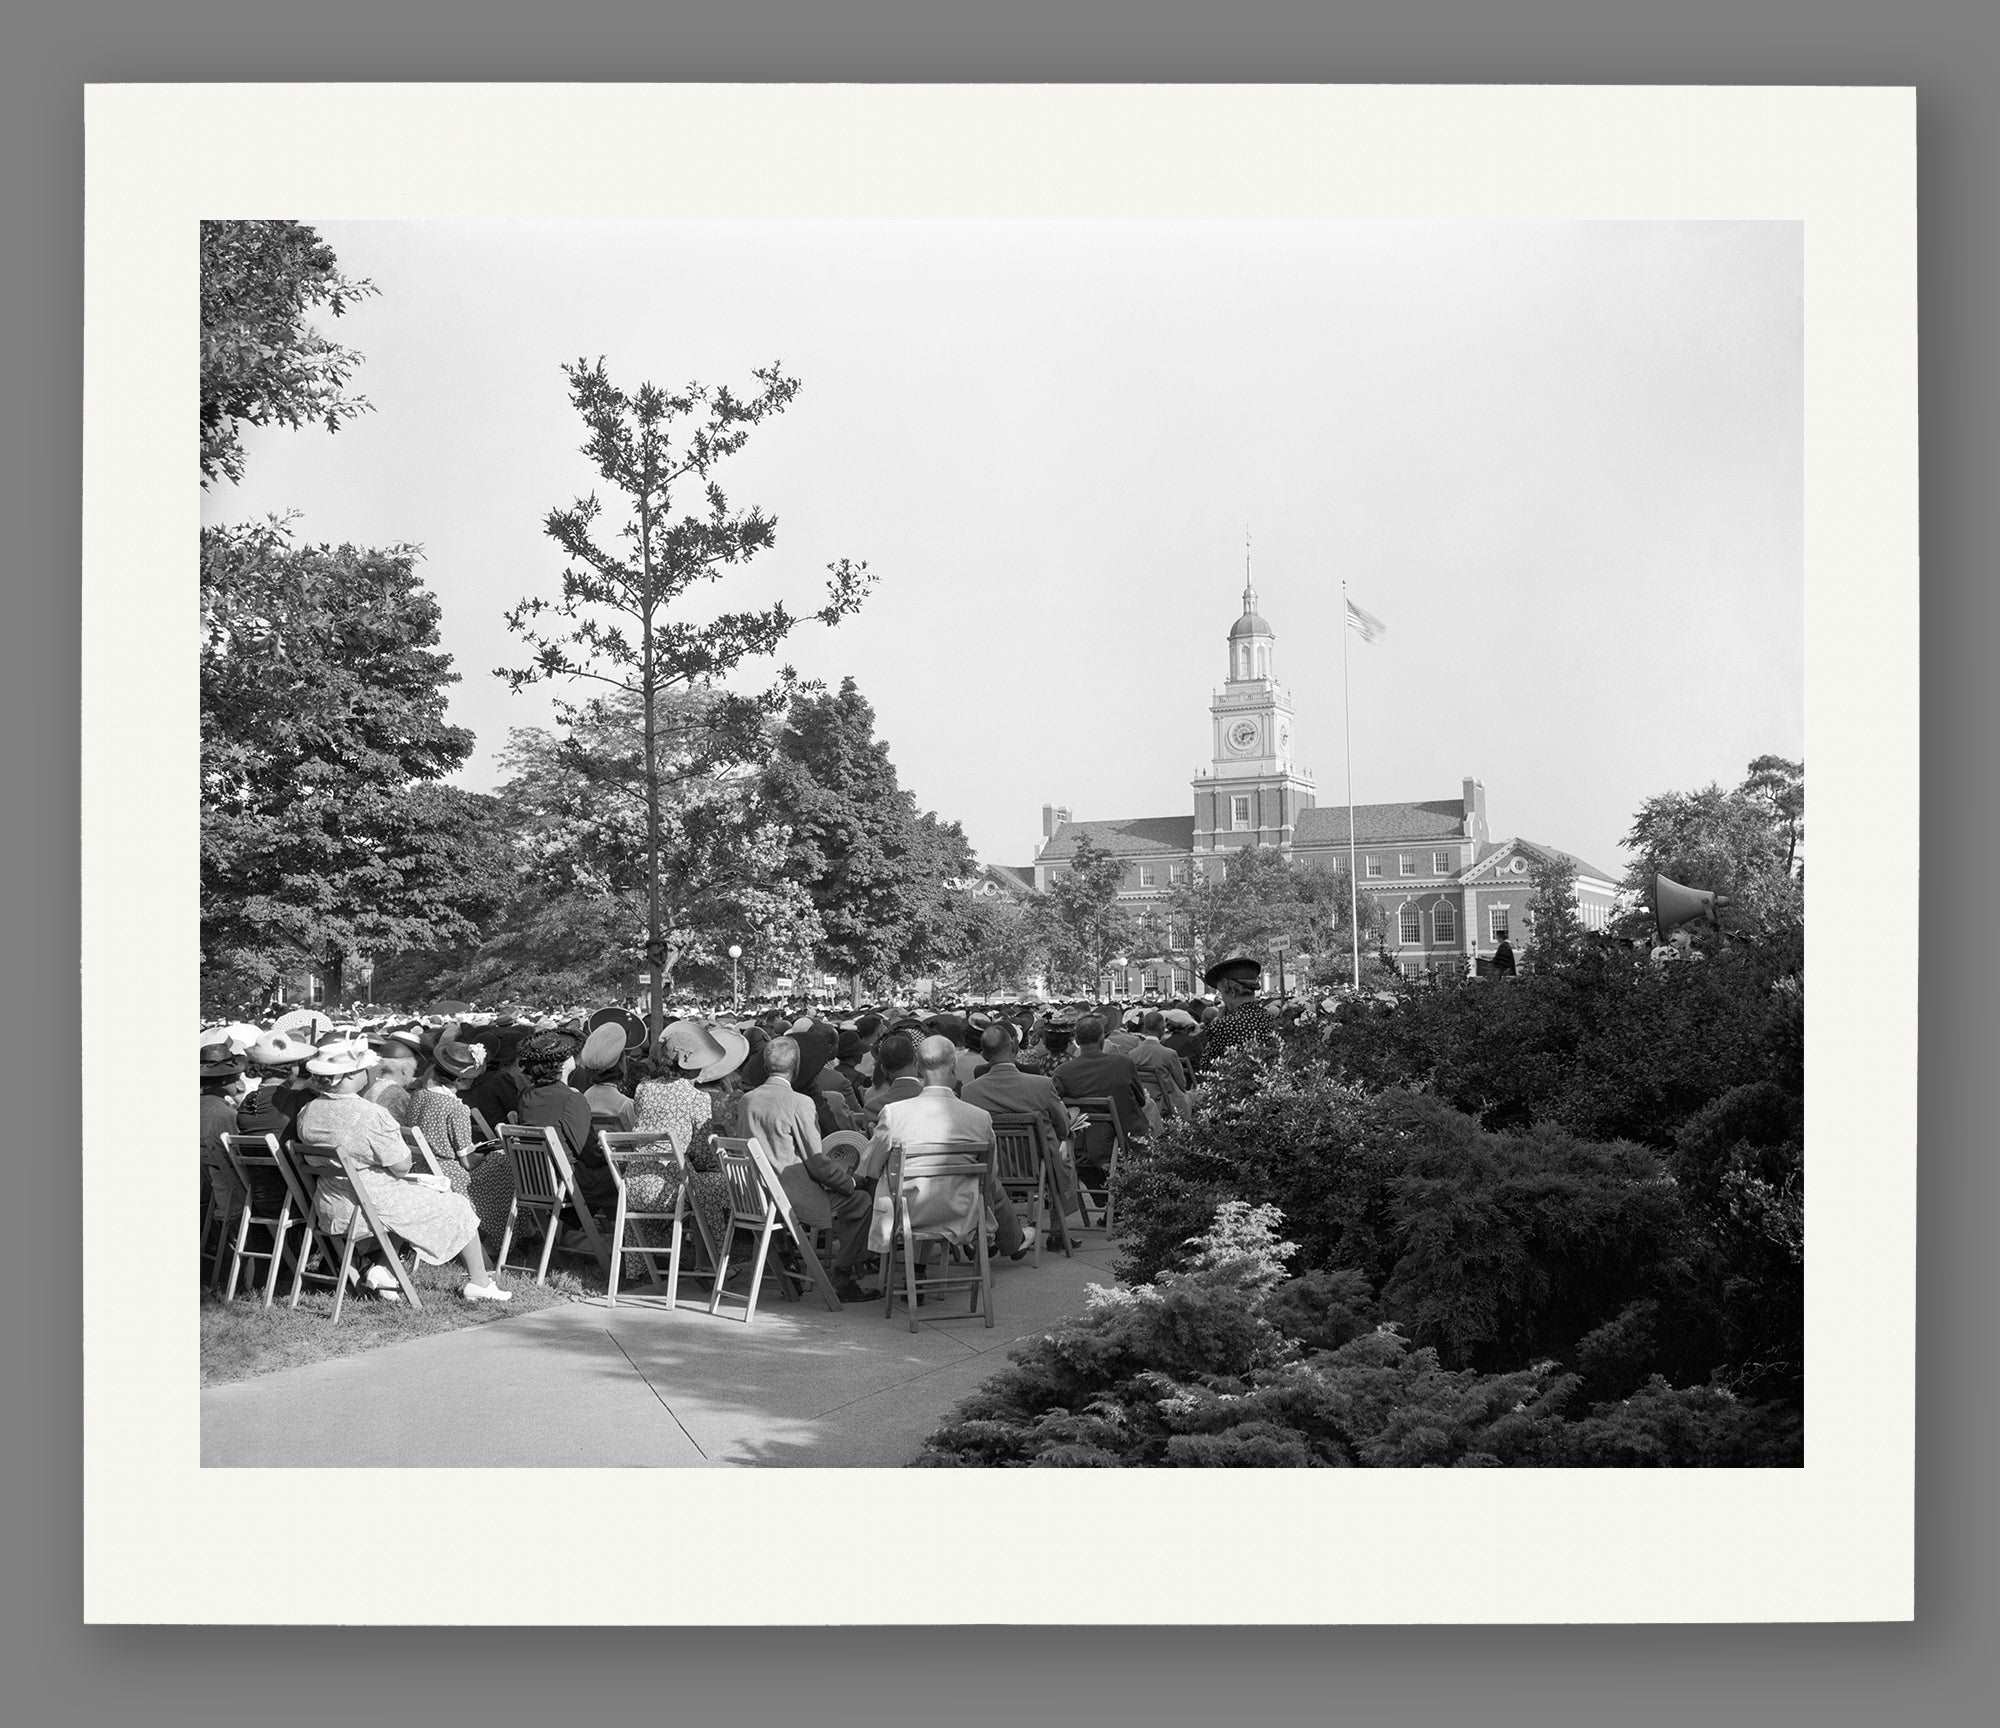 A fine art paper print of a commencement ceremony at Howard University